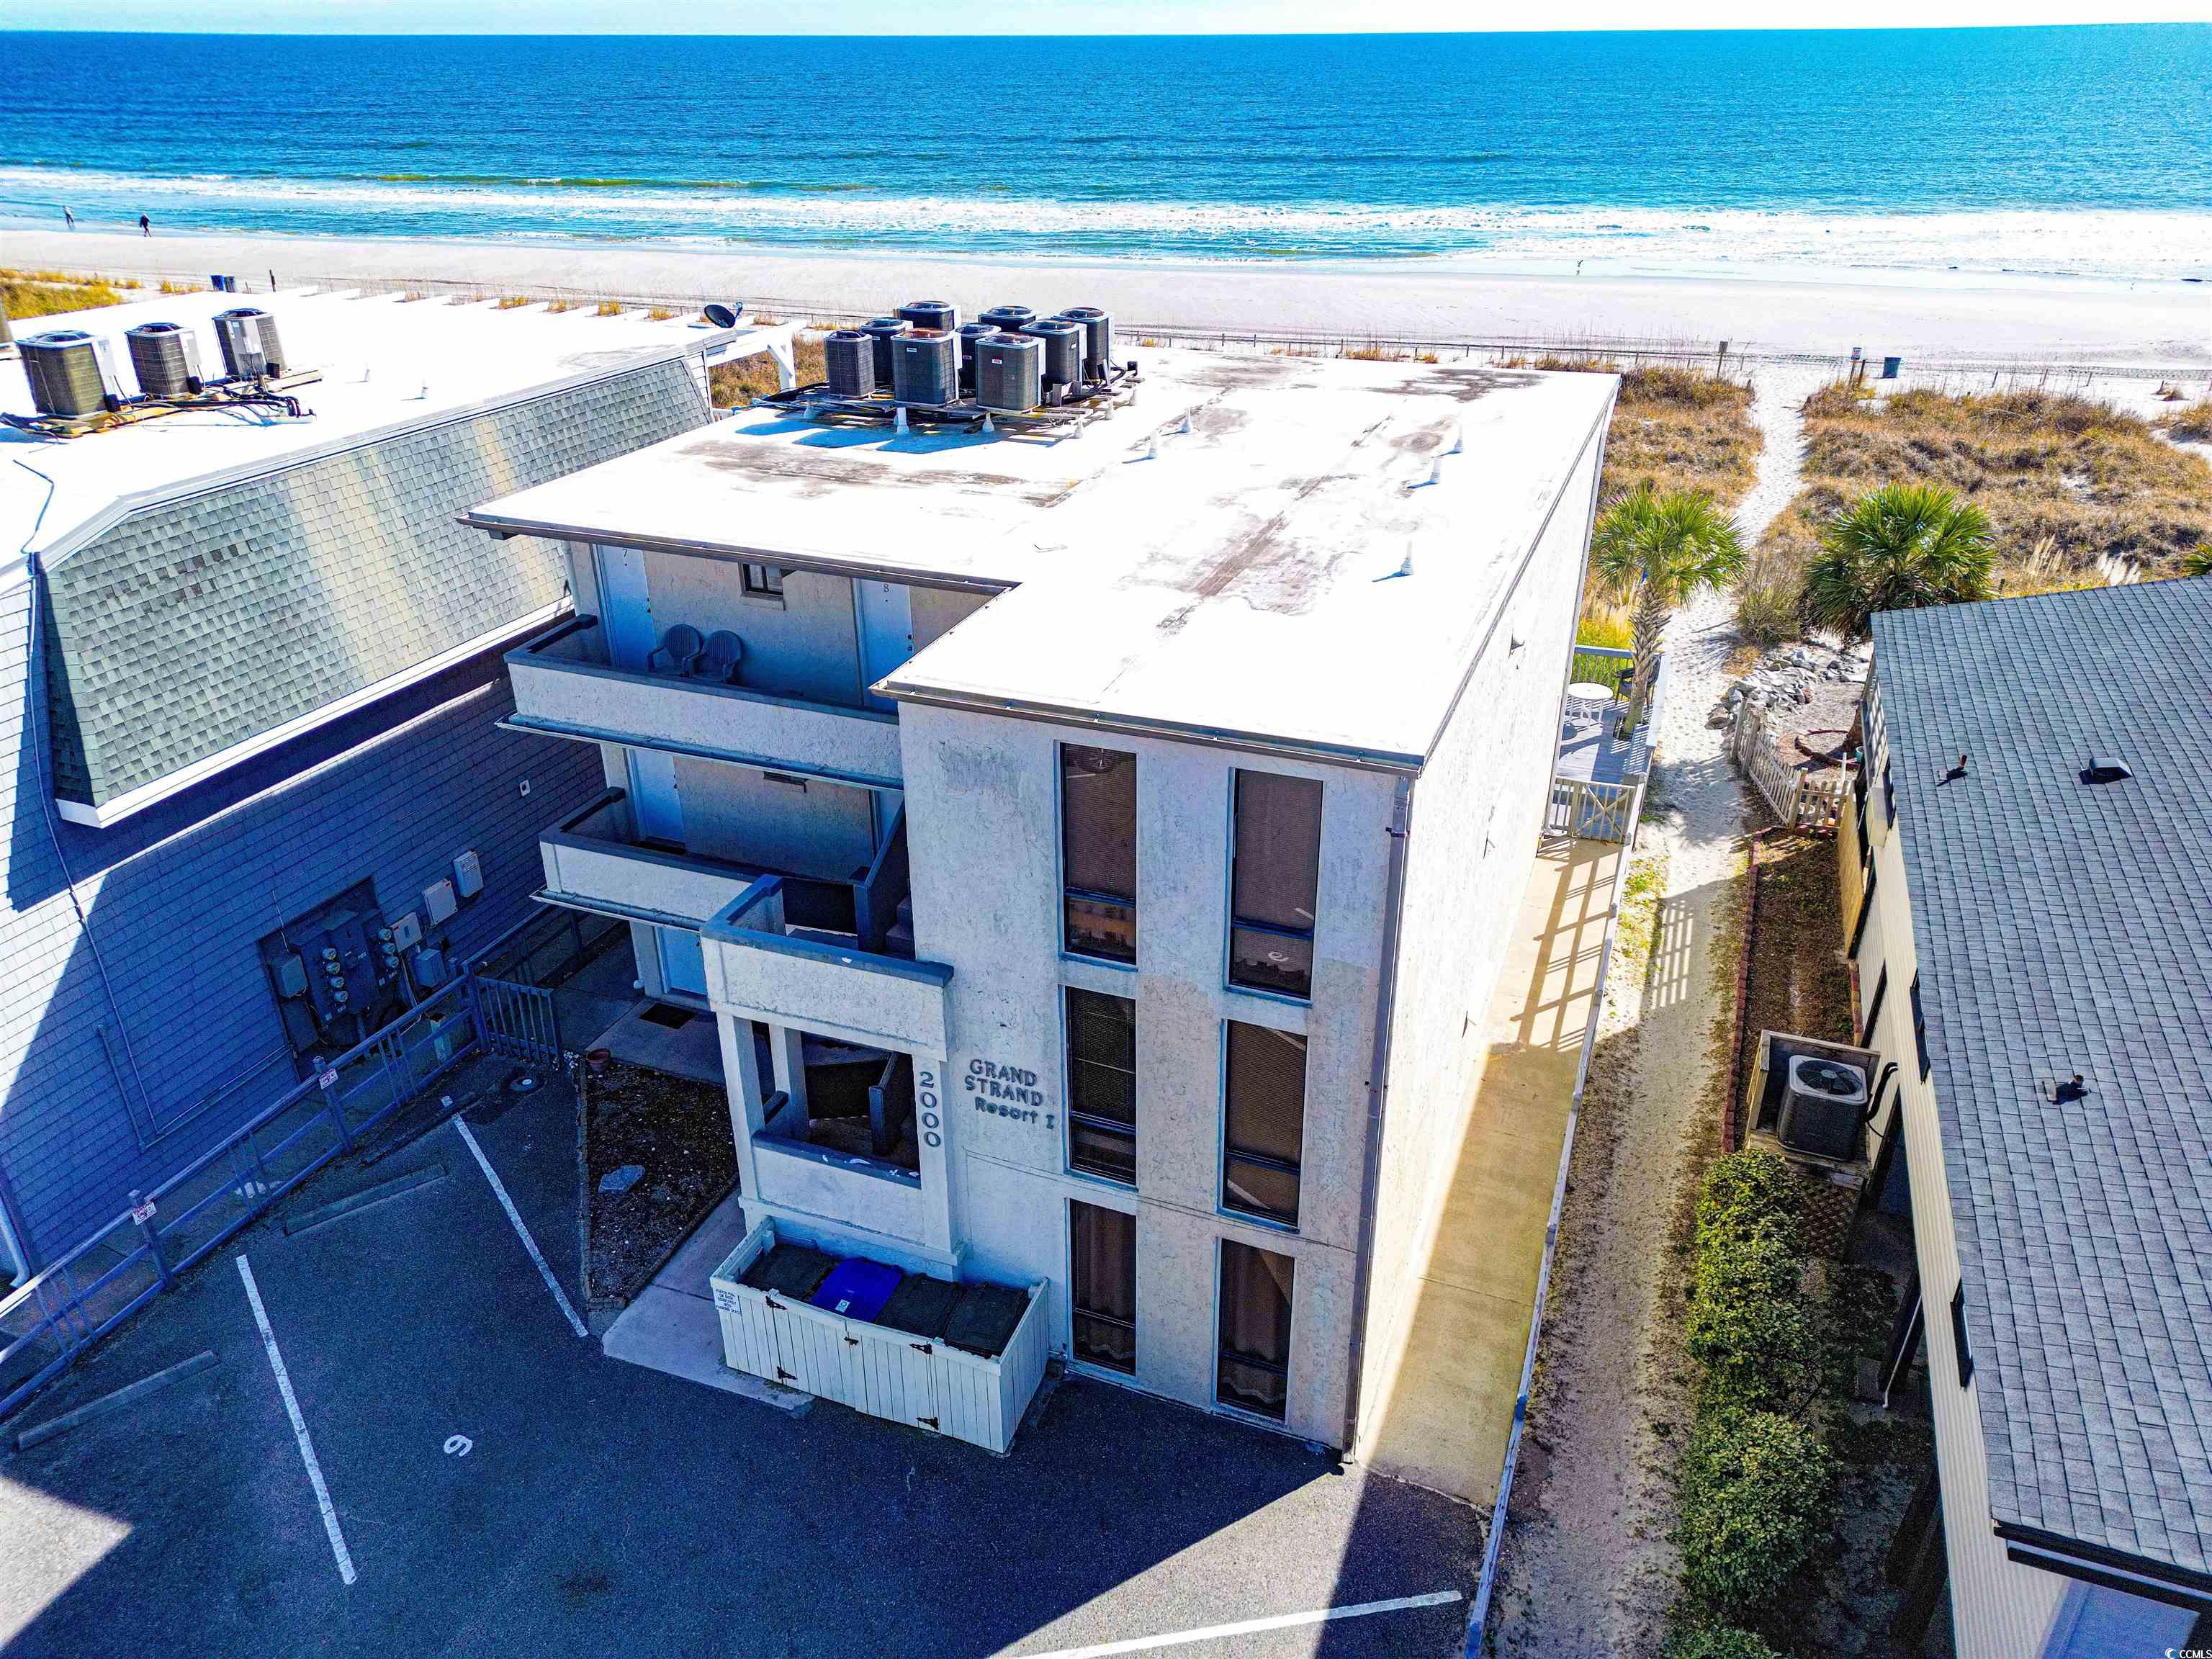 welcome to this oceanfront, turn key condo that offers the ultimate coastal living experience. it is located on the bottom floor of the complex. this unit has direct access to a huge deck which overlooks the ocean. there is a private path to the beach from the deck, which makes the beach only a few steps away! it is within blocks to shopping, restaurants, grocery, and fun activities. there are low hoa dues, and it has an excellent short term rental track record. whether you're looking for a vacation getaway or a year-round residence, this condo offers it all!